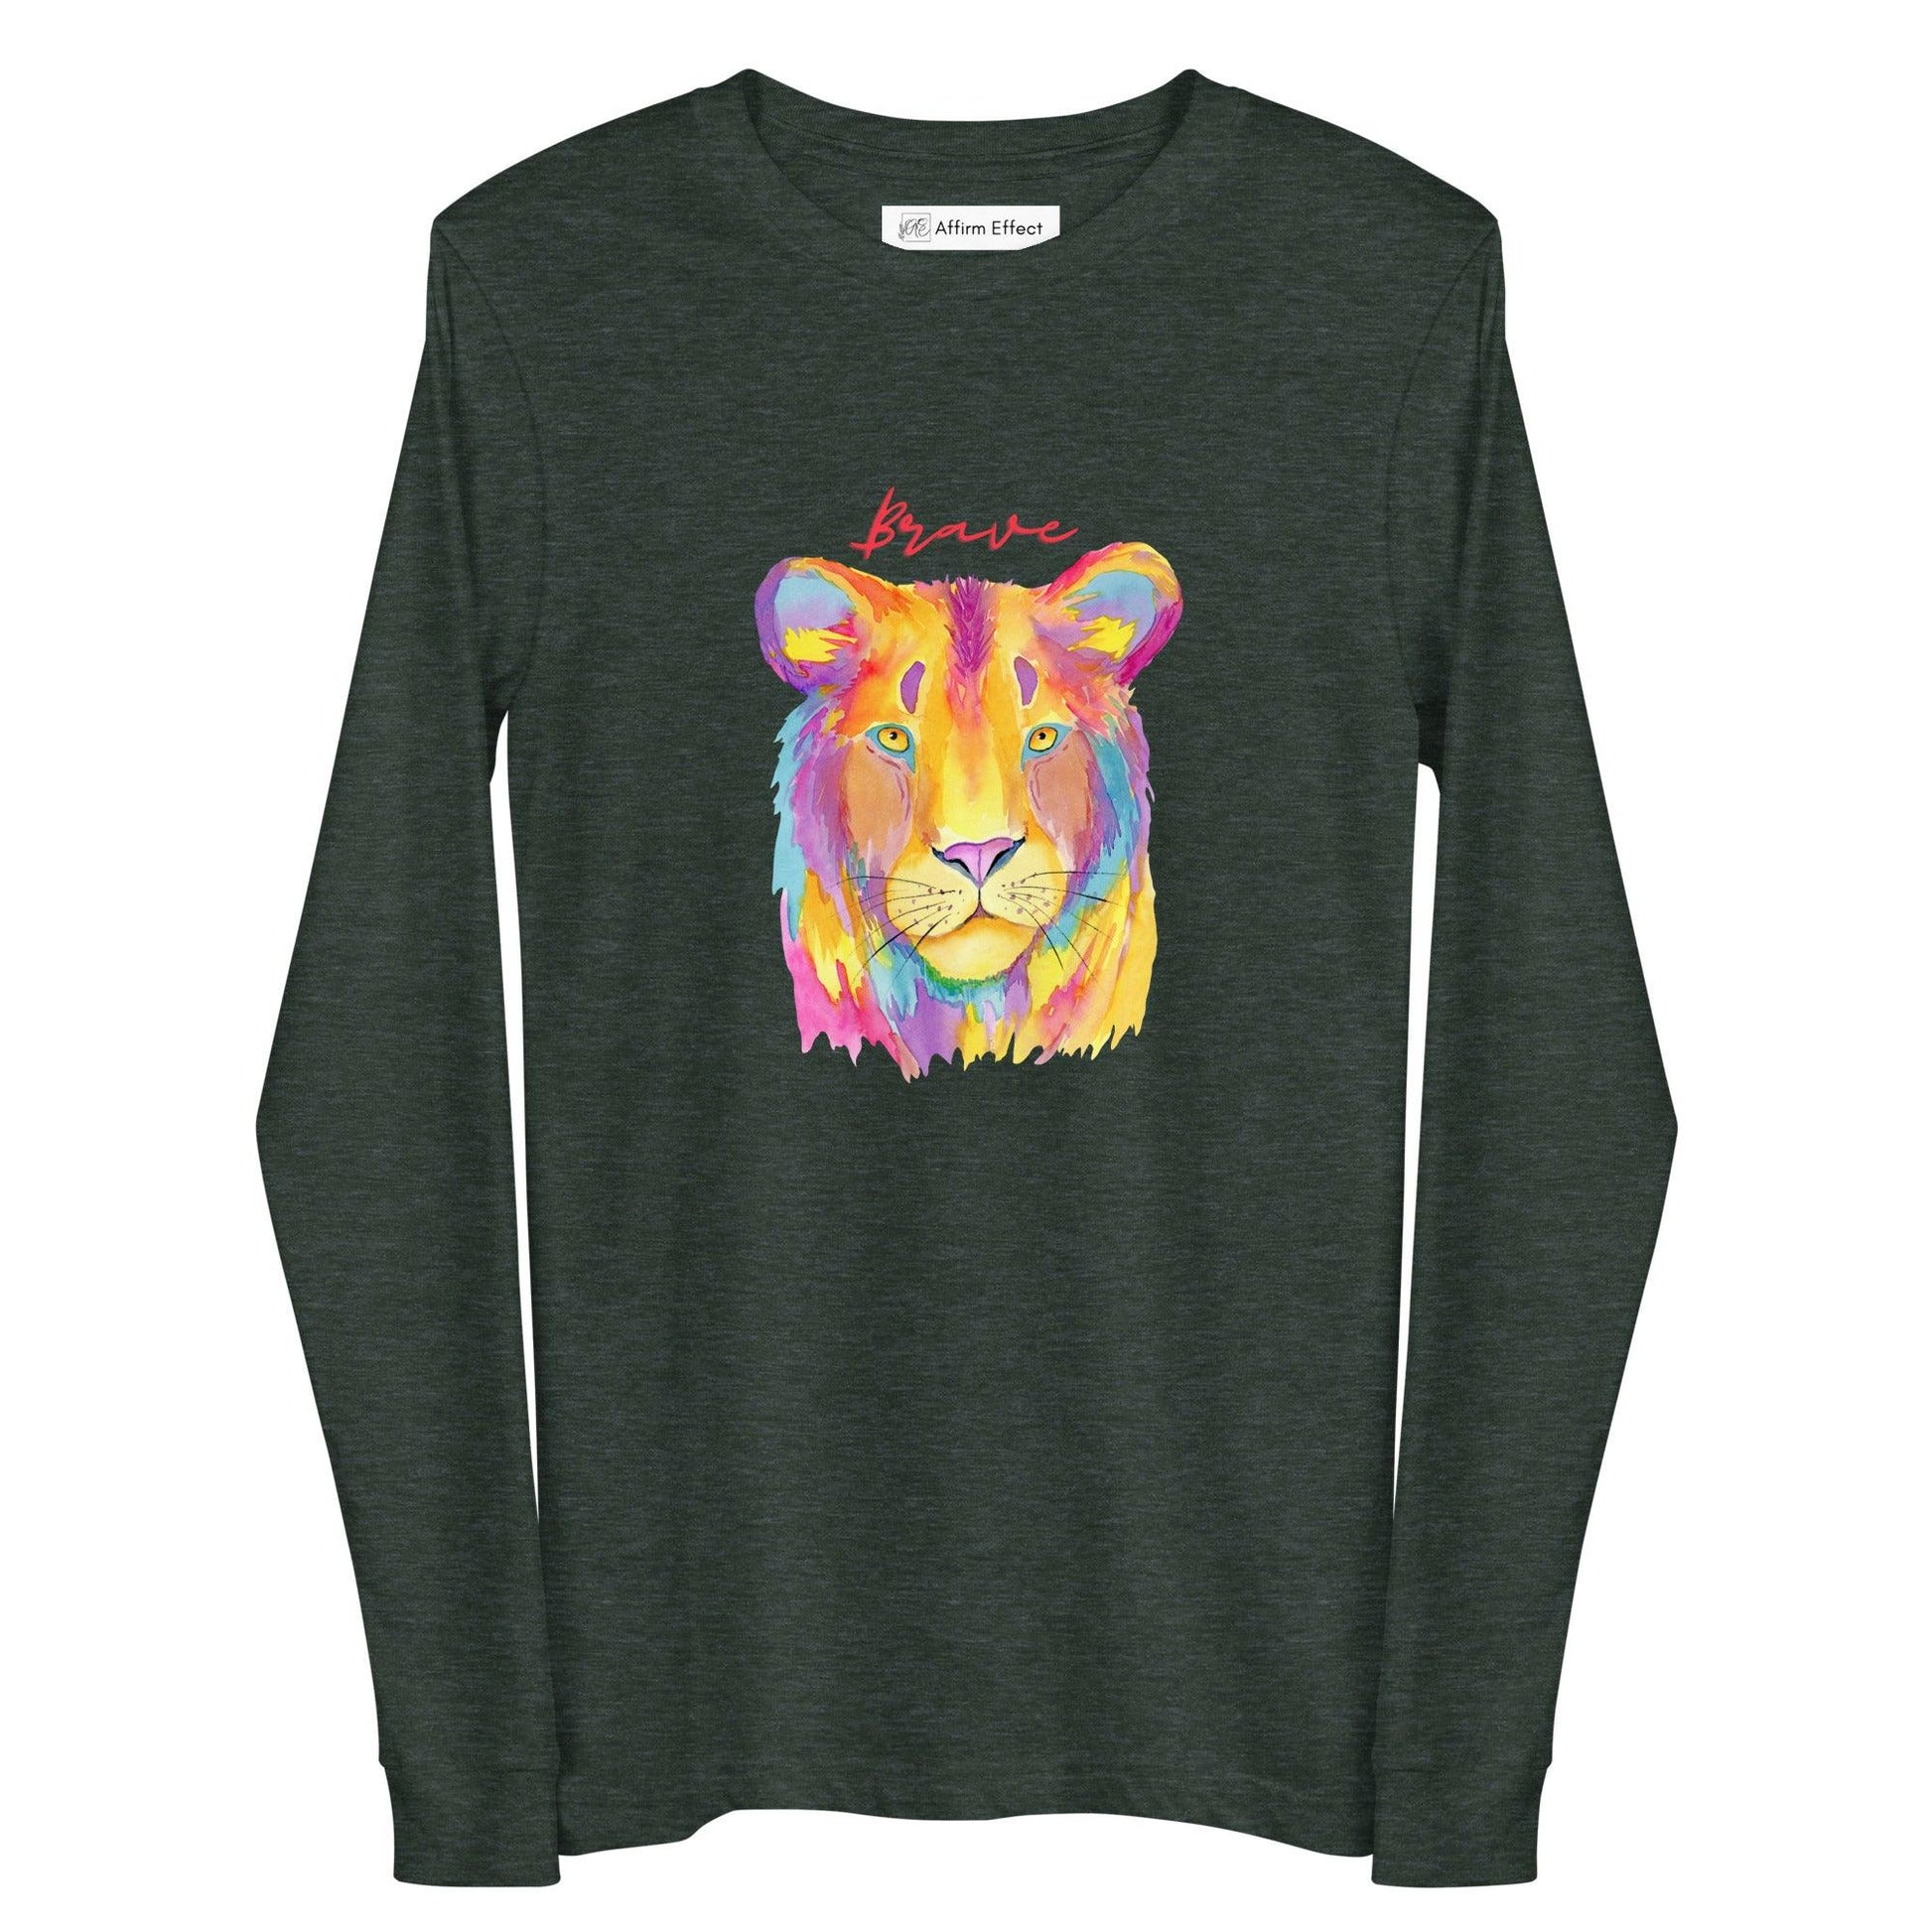 Brave Like A Lion Unisex Long Sleeve Tee - Affirm Effect